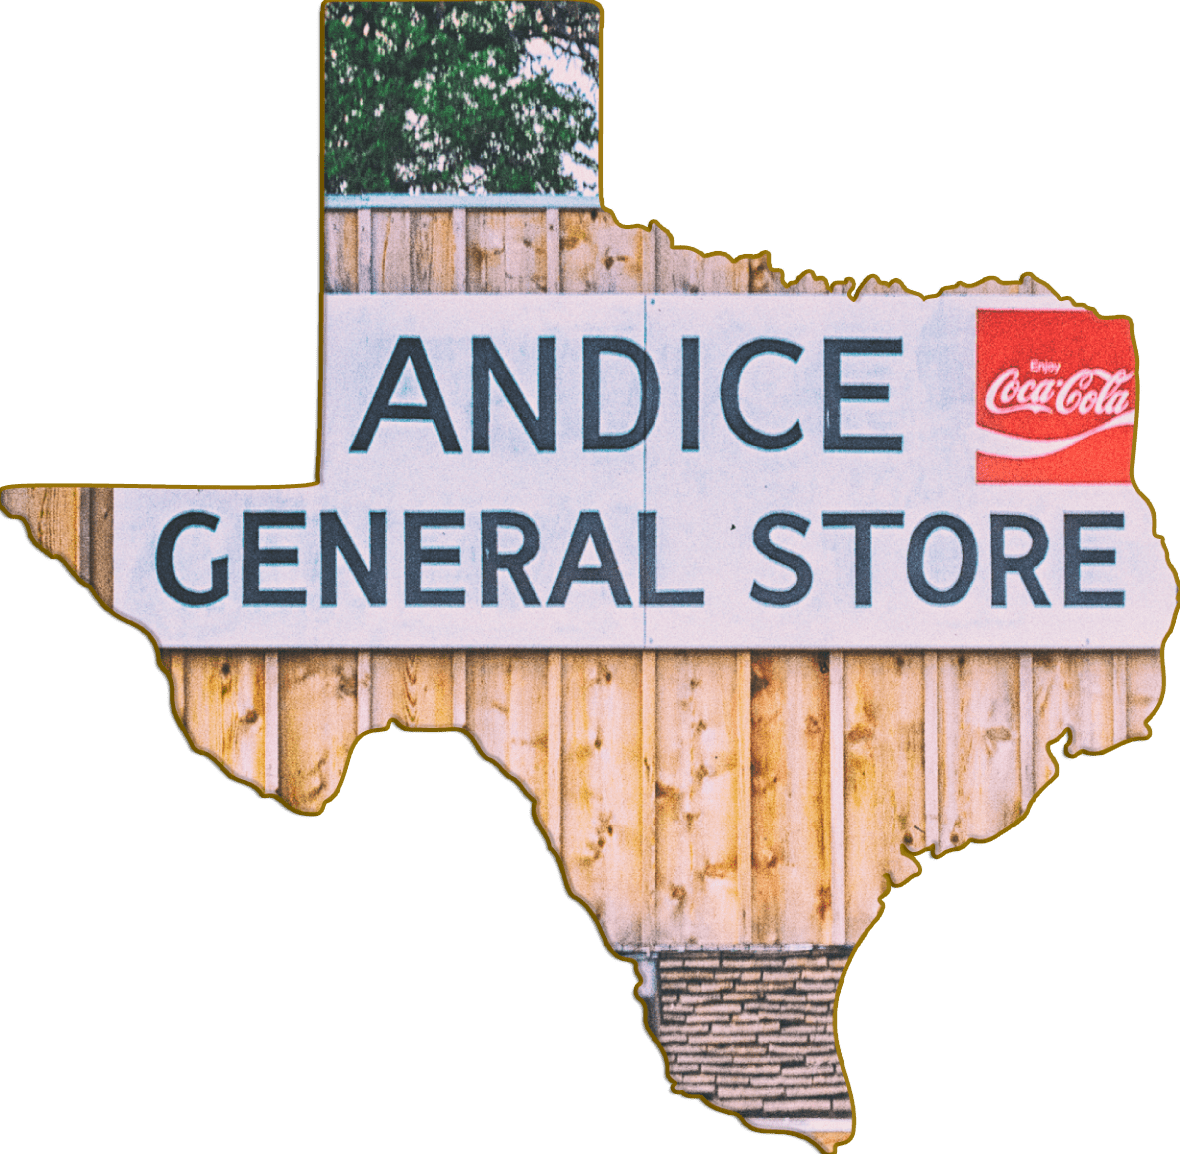 Wimberley Puzzle Company Refrigerator Magnets Andice General Store | Texas Shaped Magnet